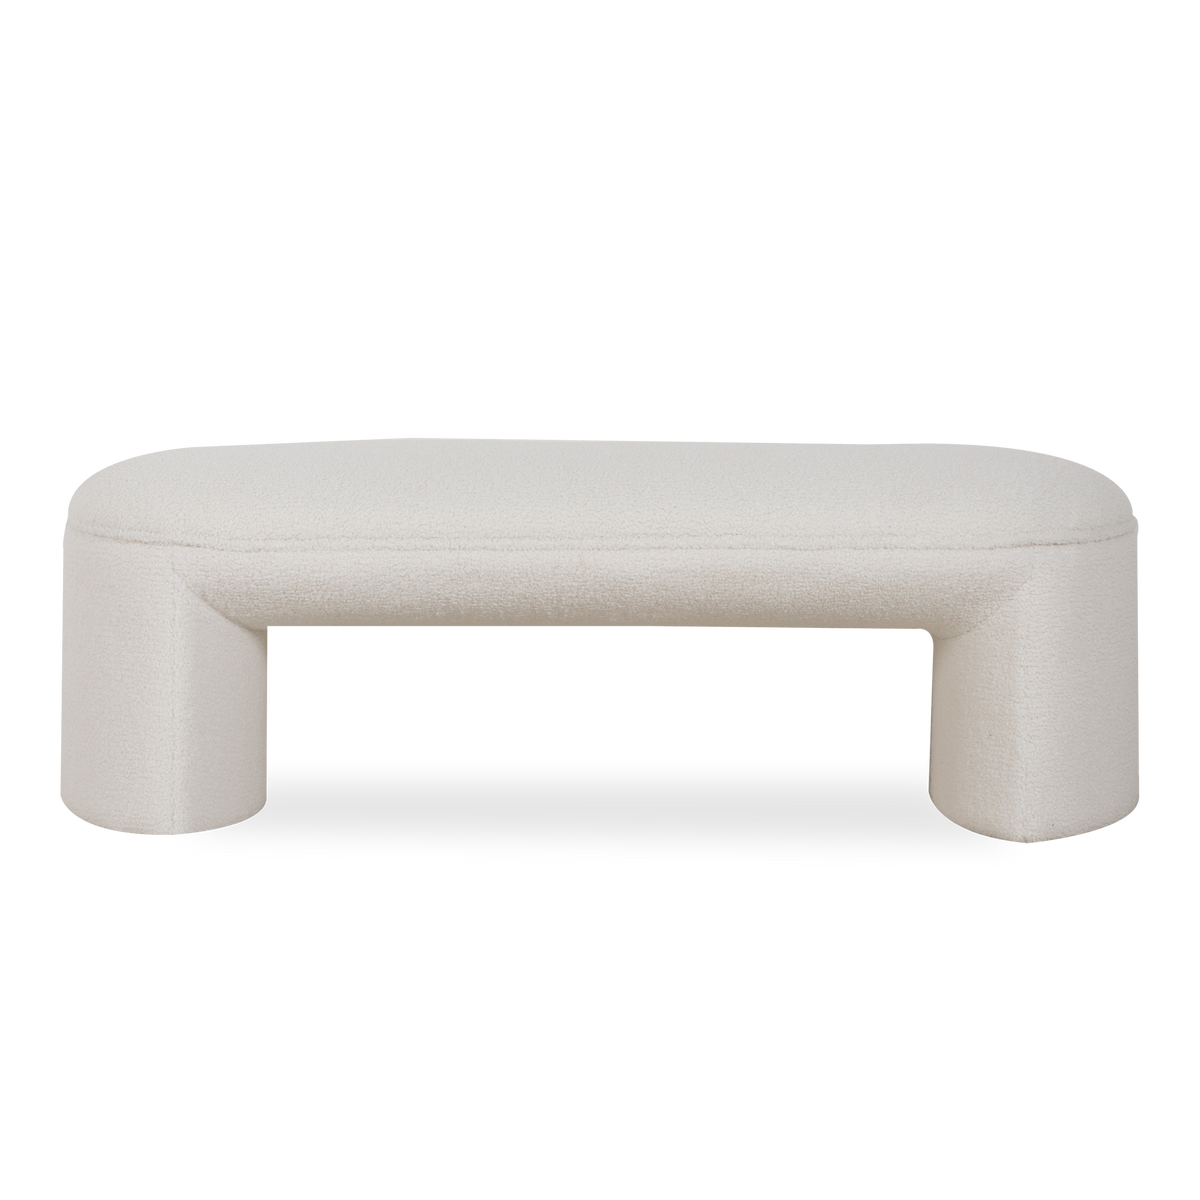 A fully sheepskin upholstered curved bench for a modern luxury accent to end of bed, entryways and living spaces.